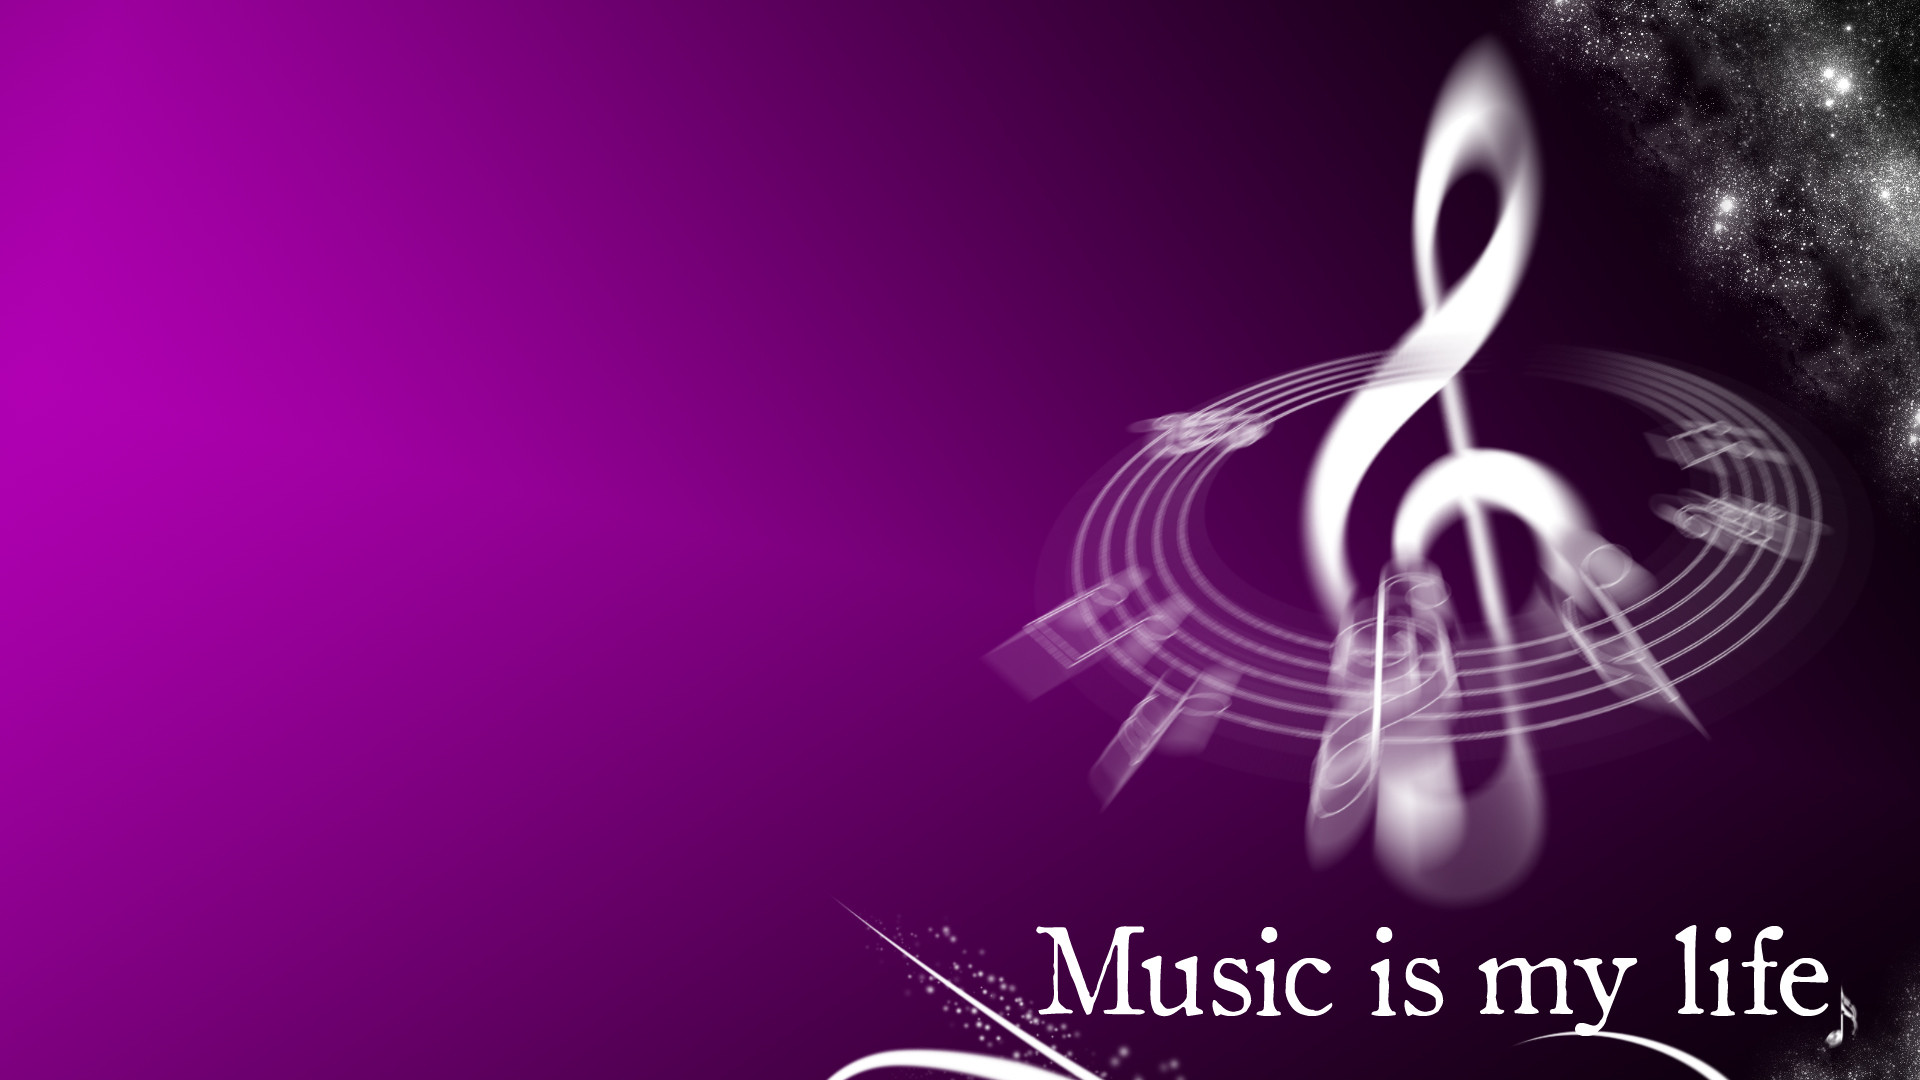 1920x1080 ... Music is my life 1 by MartinCom